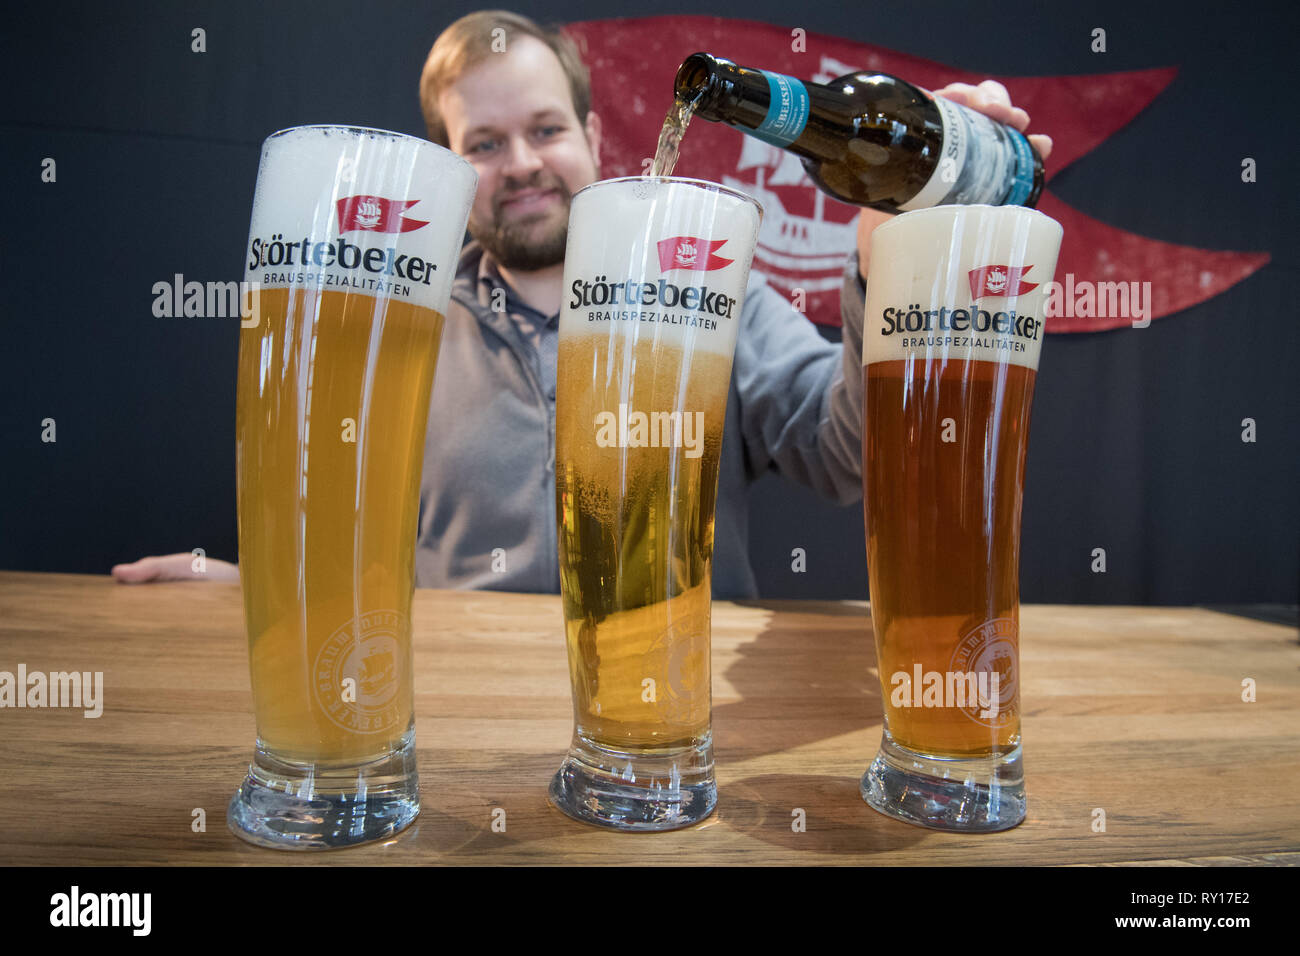 Stralsund, Germany. 11th Mar, 2019. The master brewer Jens Reineke tests the beer varieties Störtebeker Witt-Bier (l-r), Störtebeker Übersee-Pils and Störtebeker Baltik-Lager. Beer has been brewed in the traditional brewery of the Hanseatic city since 1827. The Störtebeker brewery presented new products and projects on the same day. The assortment will therefore grow to 20 varieties this year. 2018 was a record year for the Stralsund company. 248,000 hectolitres were sold. Credit: Stefan Sauer/dpa-Zentralbild/dpa/Alamy Live News Stock Photo